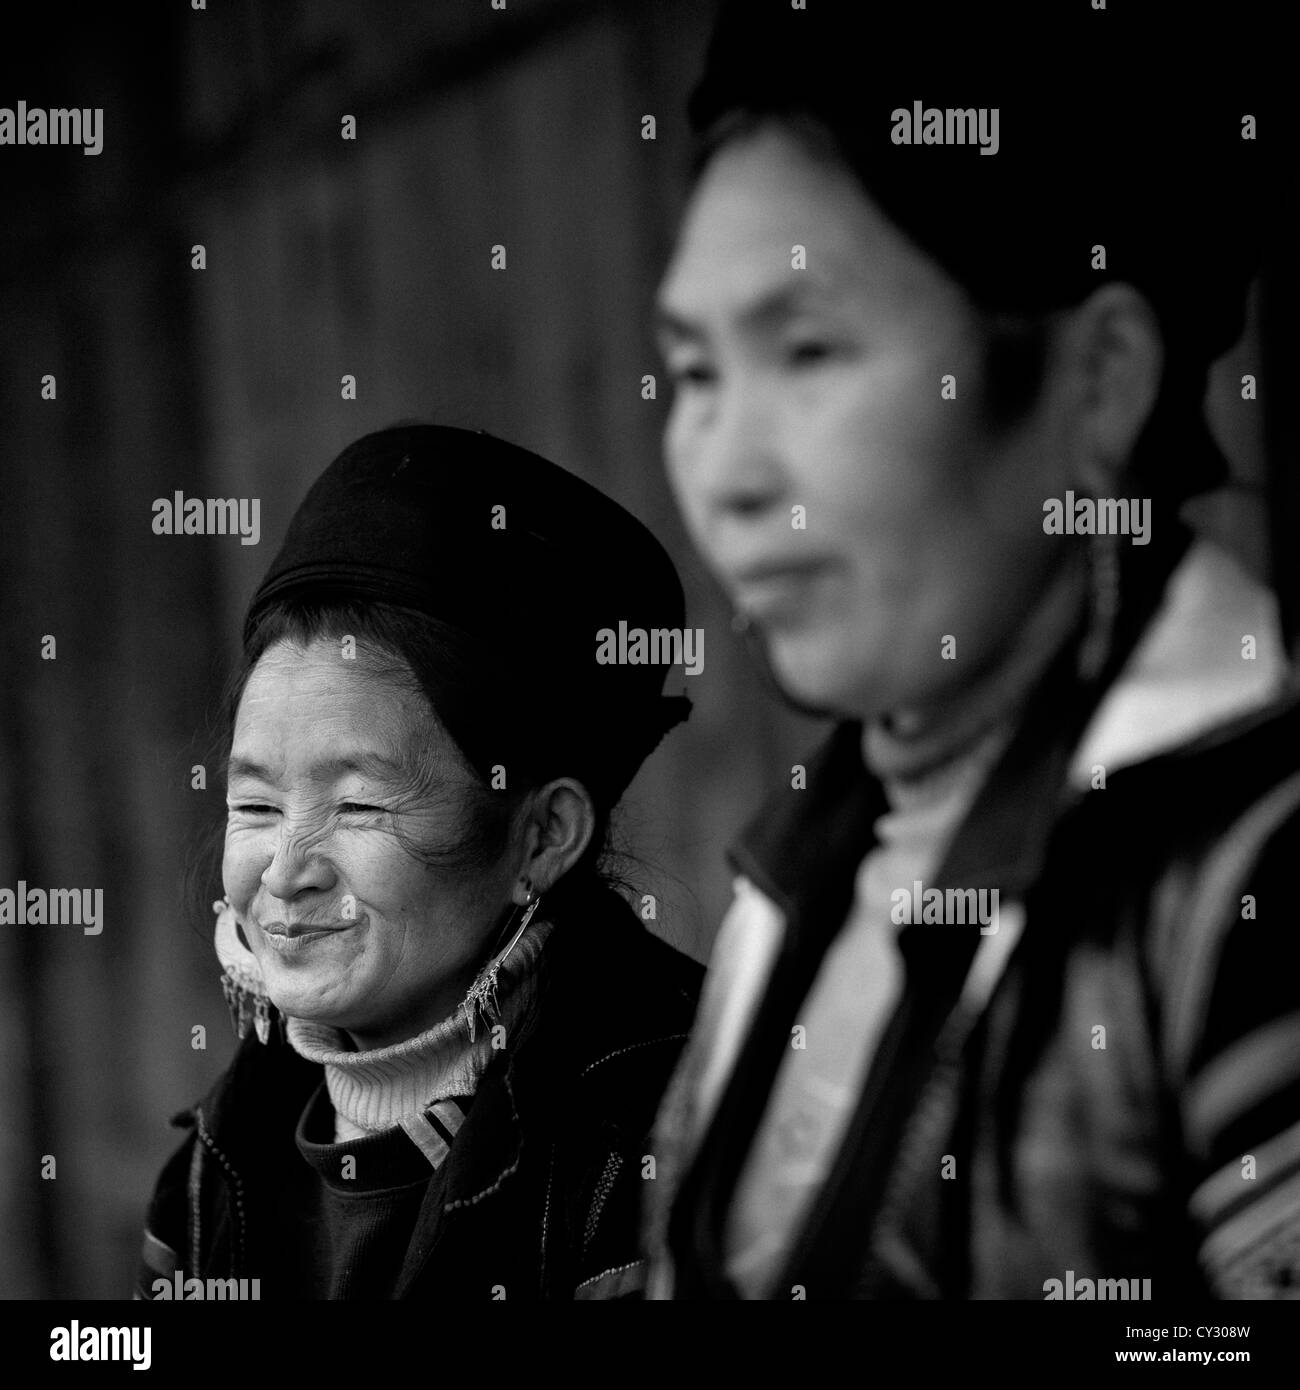 Black Hmong Women With Traditional Hat And Earrings, Sapa, Vietnam Stock Photo